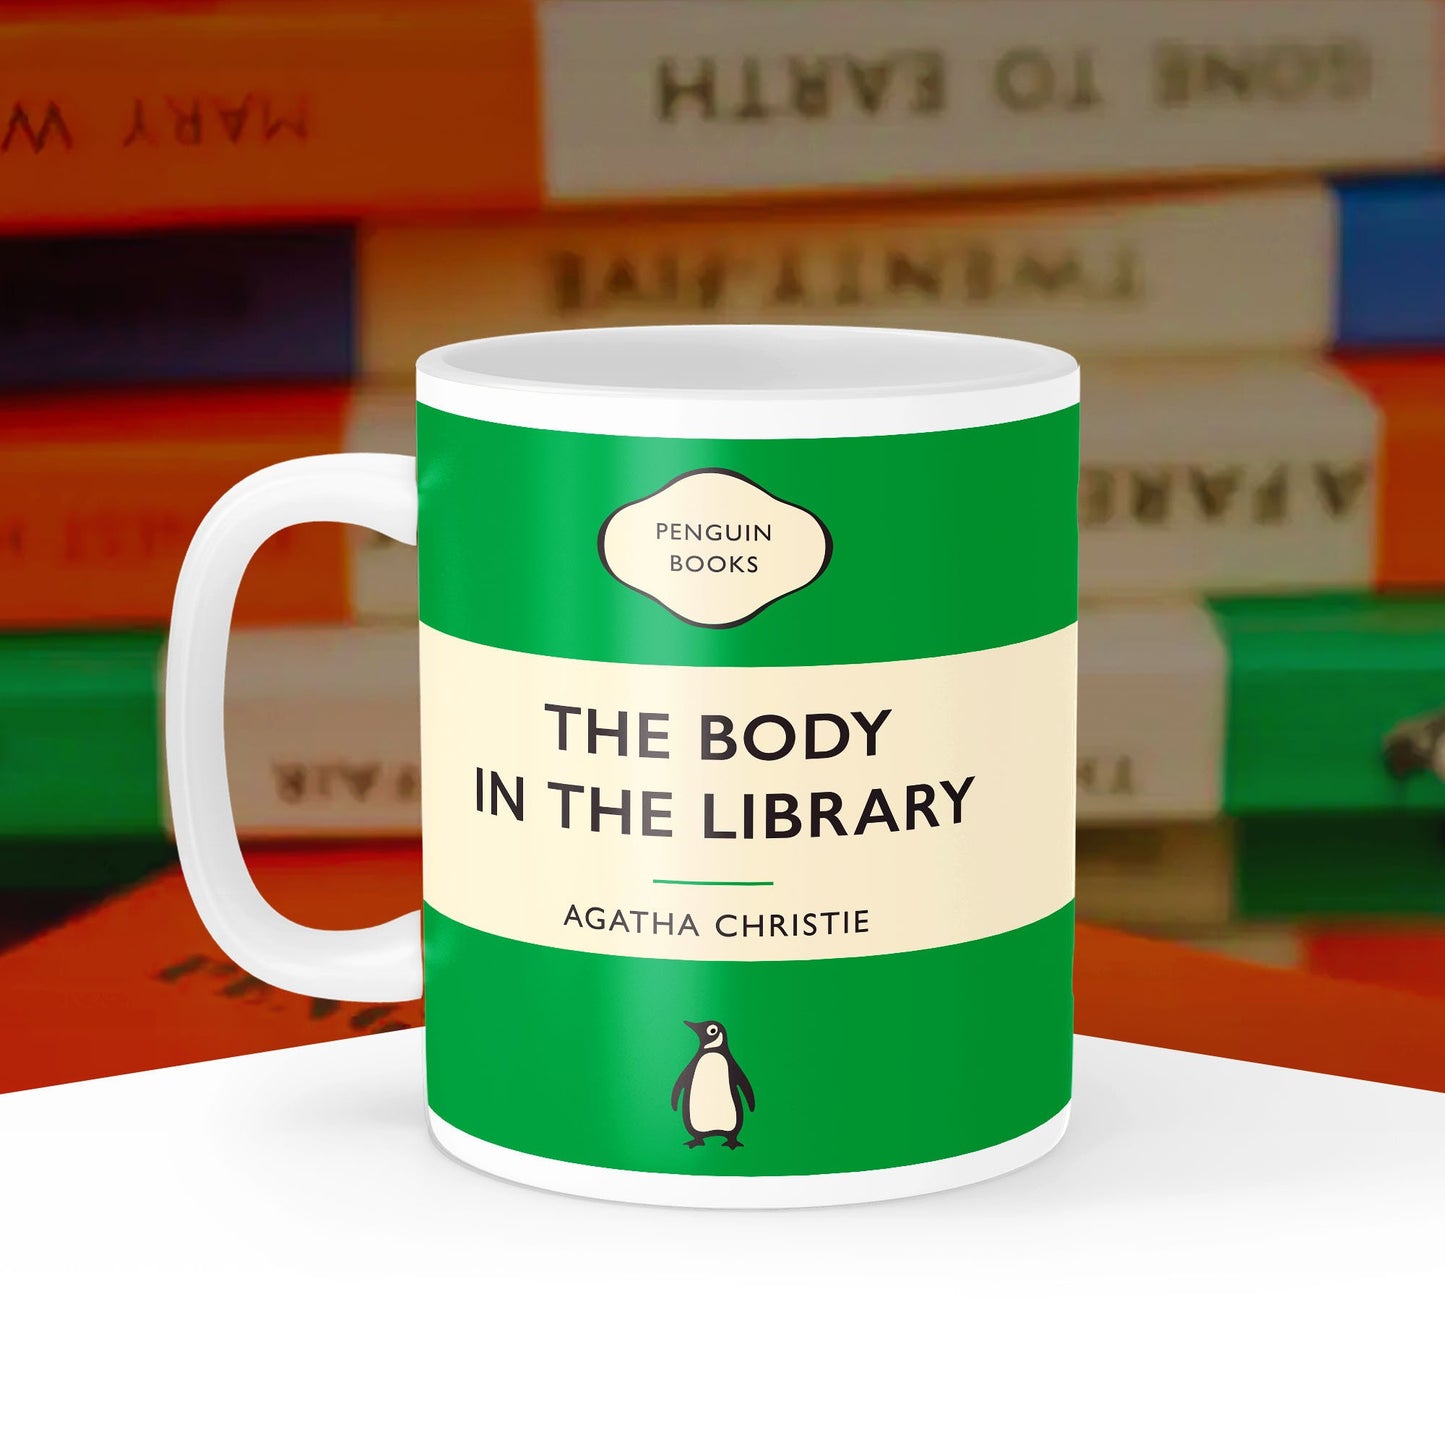 The Body in the Library - Agatha Christie Penguin Book Cover Mug